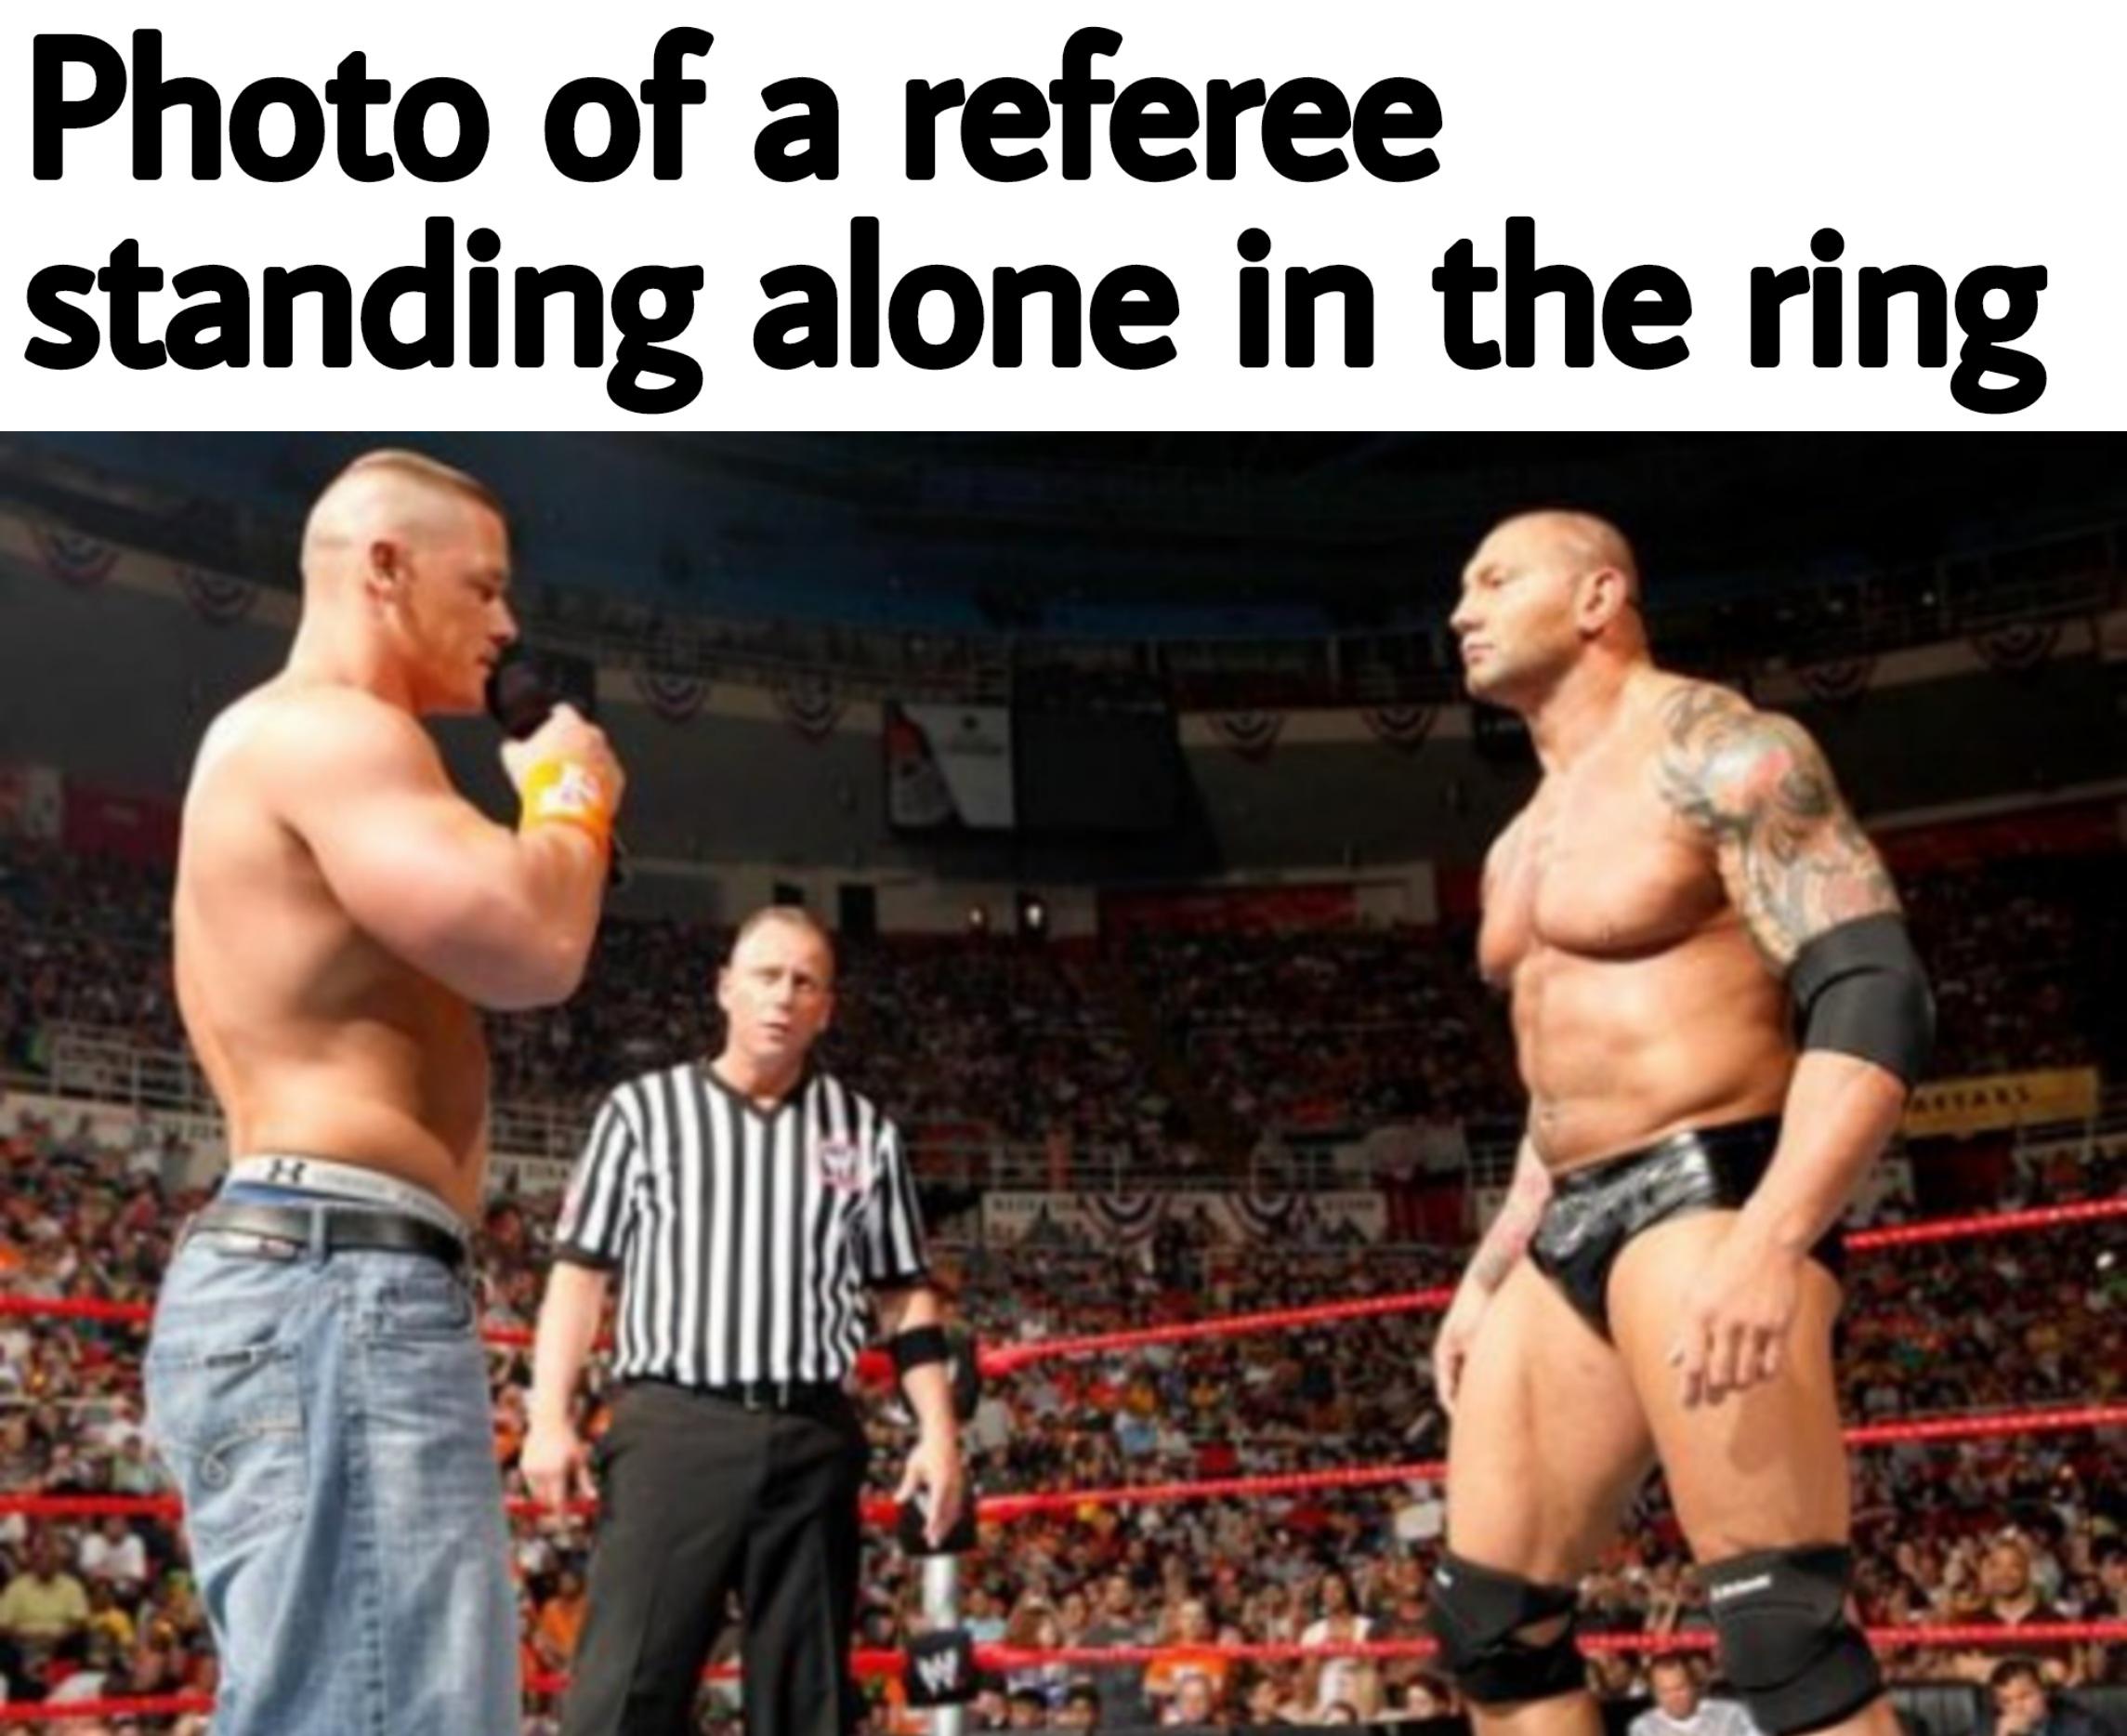 dank memes - wrestler - Photo of a referee standing alone in the ring w